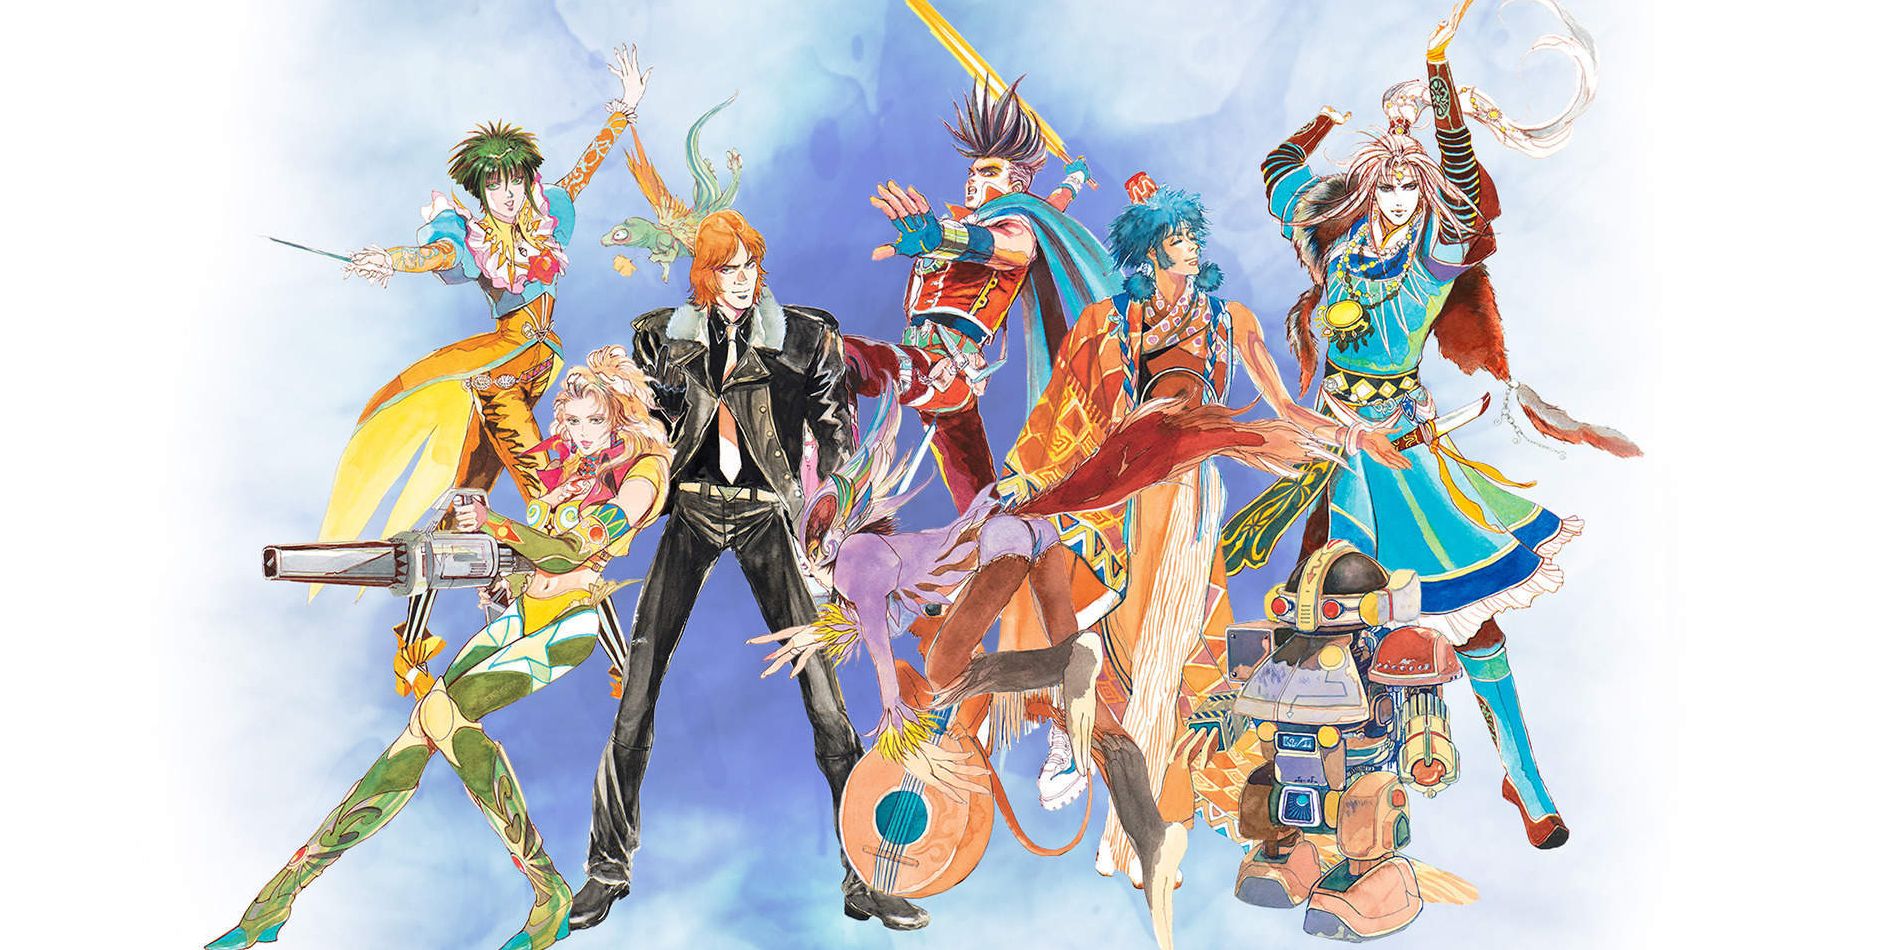 saga frontier remastered new characters